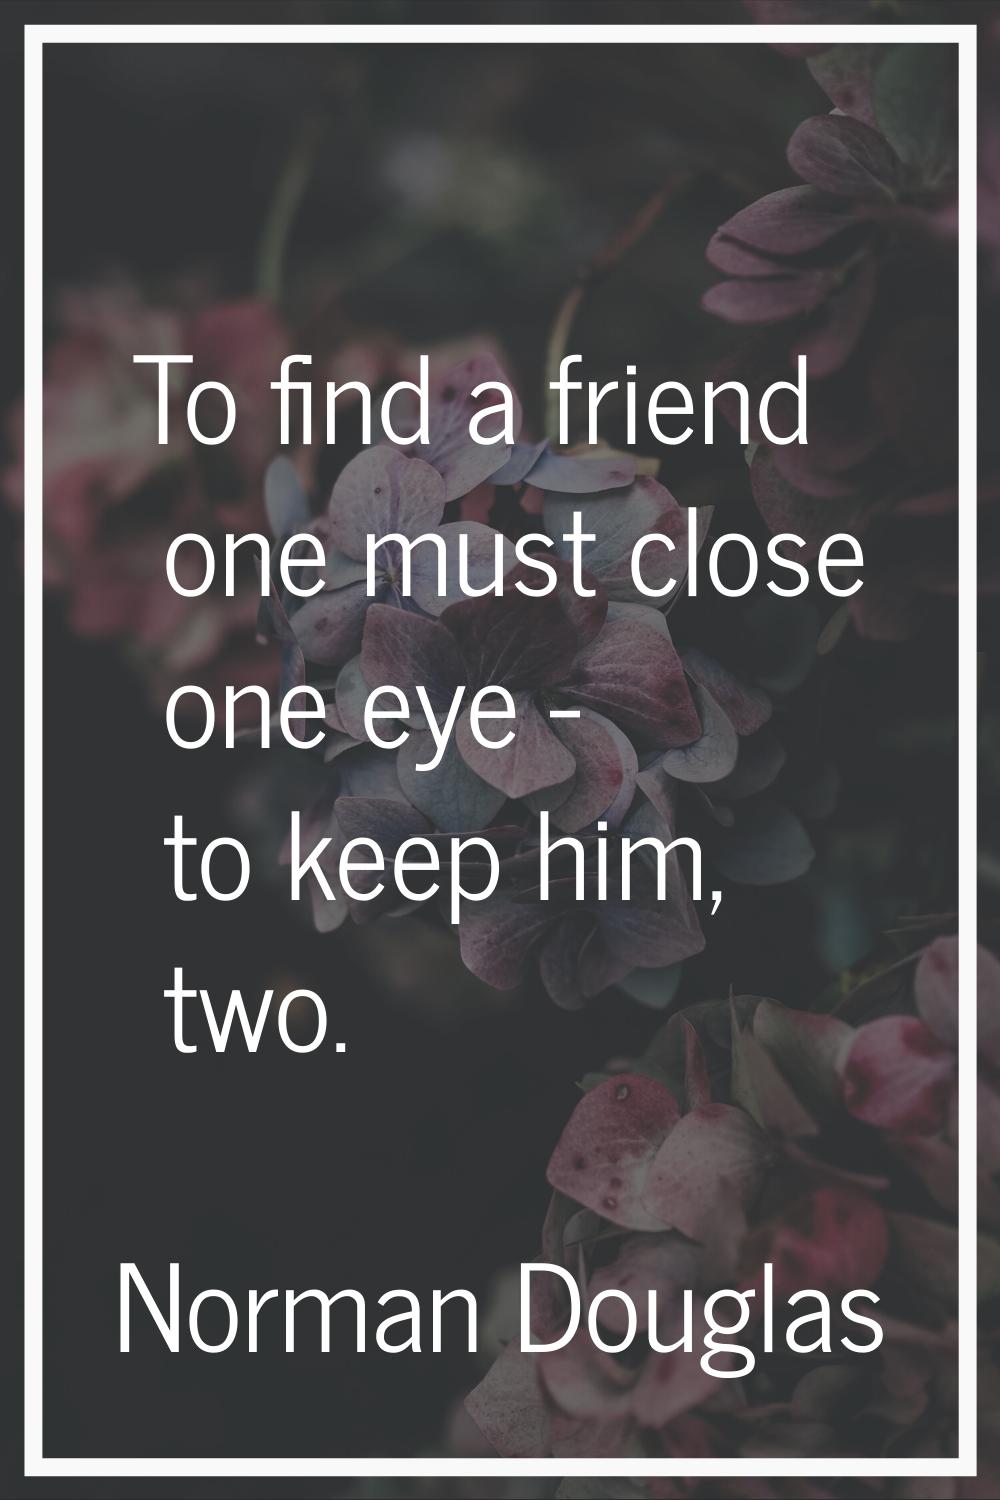 To find a friend one must close one eye - to keep him, two.